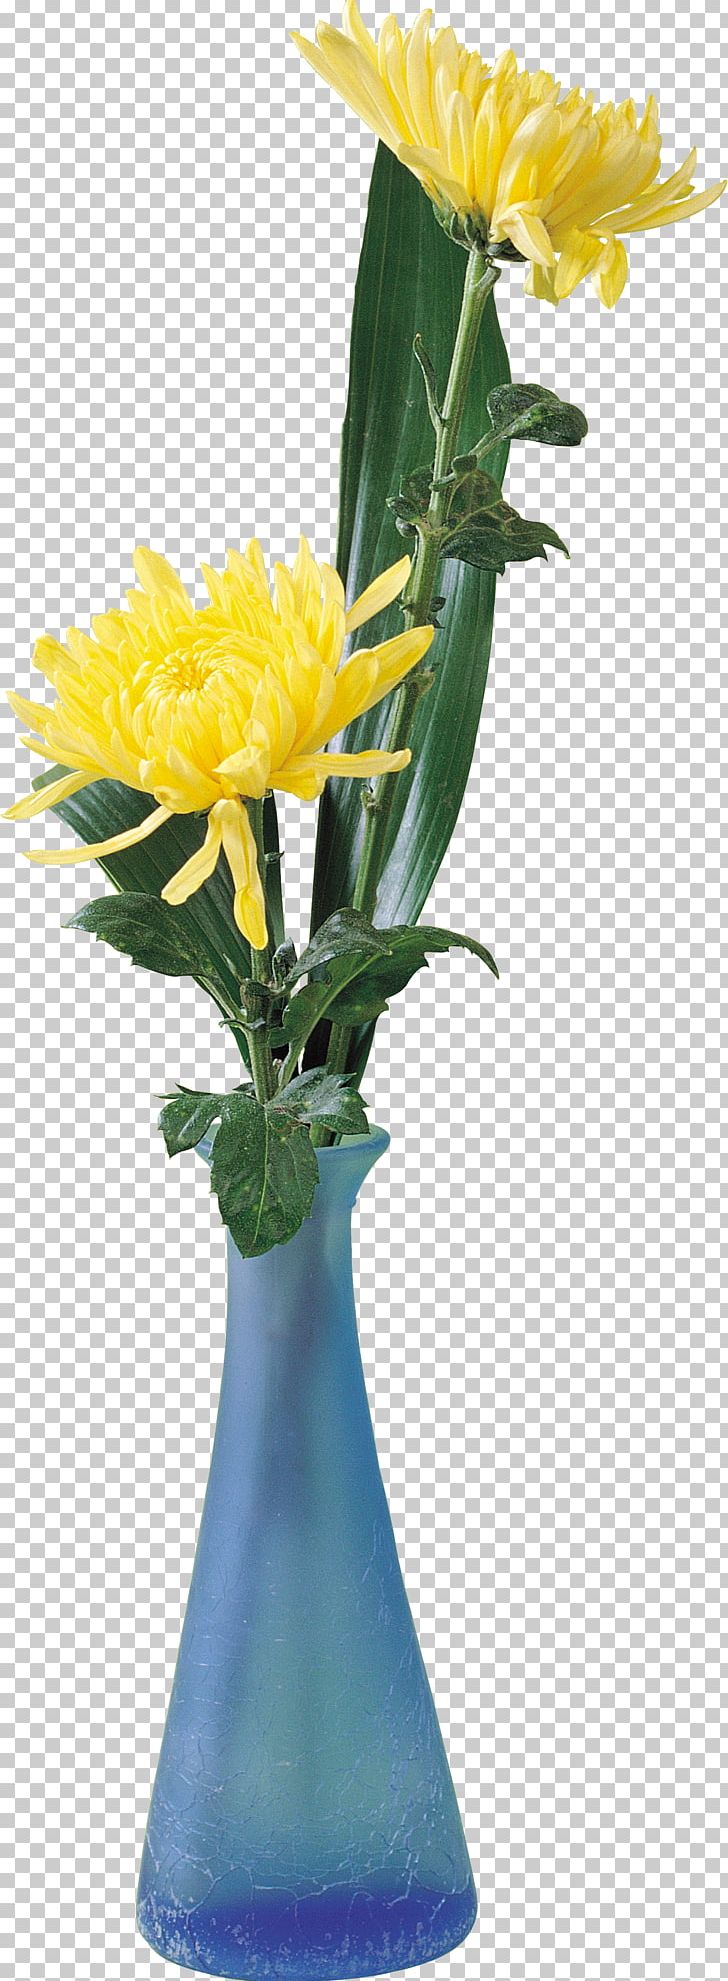 Cut Flowers Chrysanthemum PNG, Clipart, Artificial Flower, Arumlily, Chrysanthemum, Cut Flowers, Floral Design Free PNG Download